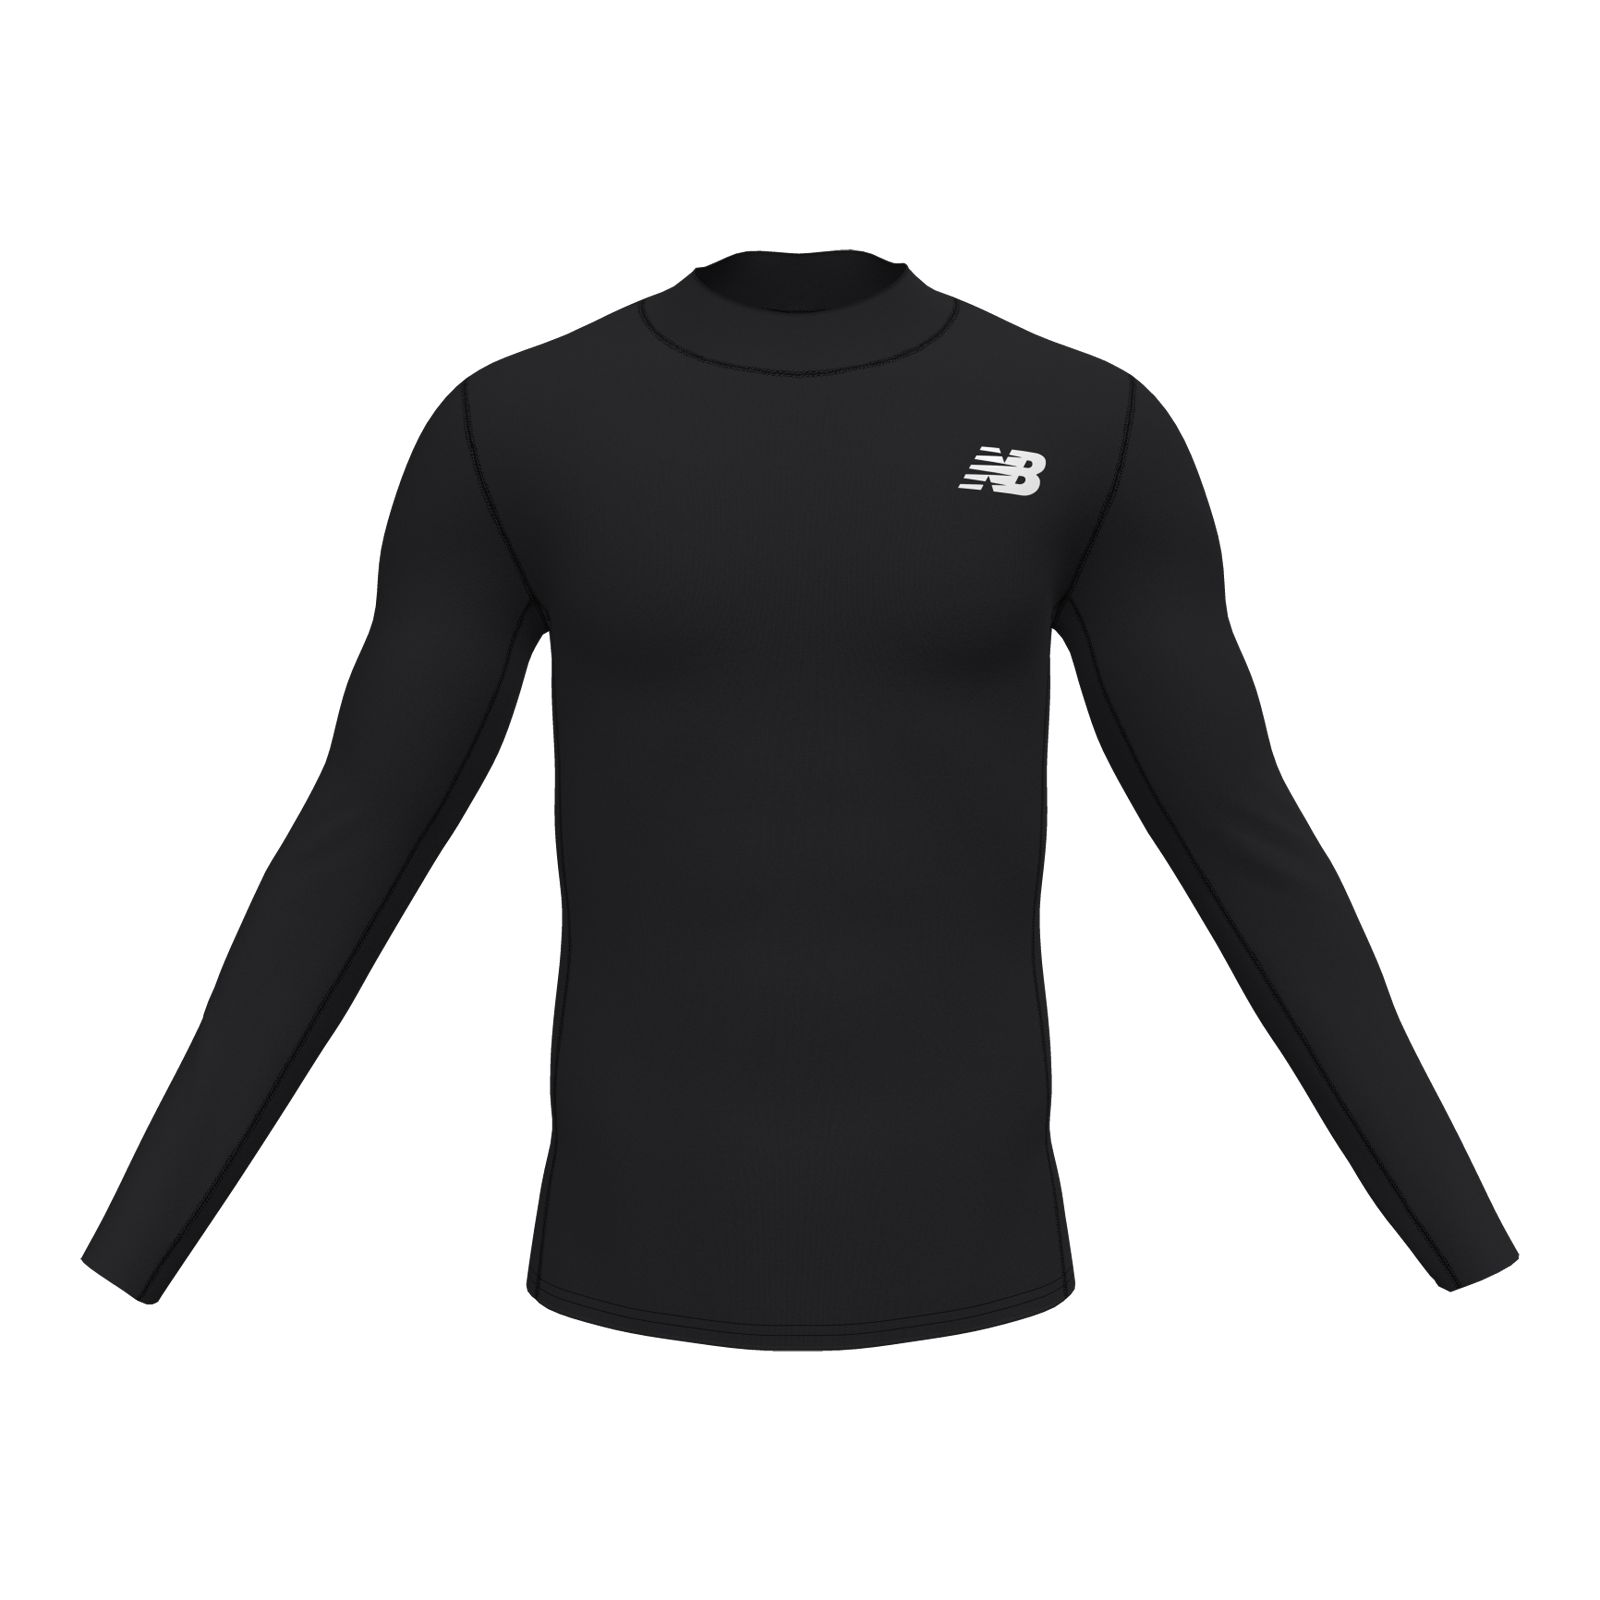 Clearance Men's Thermal Compression Shirts Long Sleeve Mock Neck